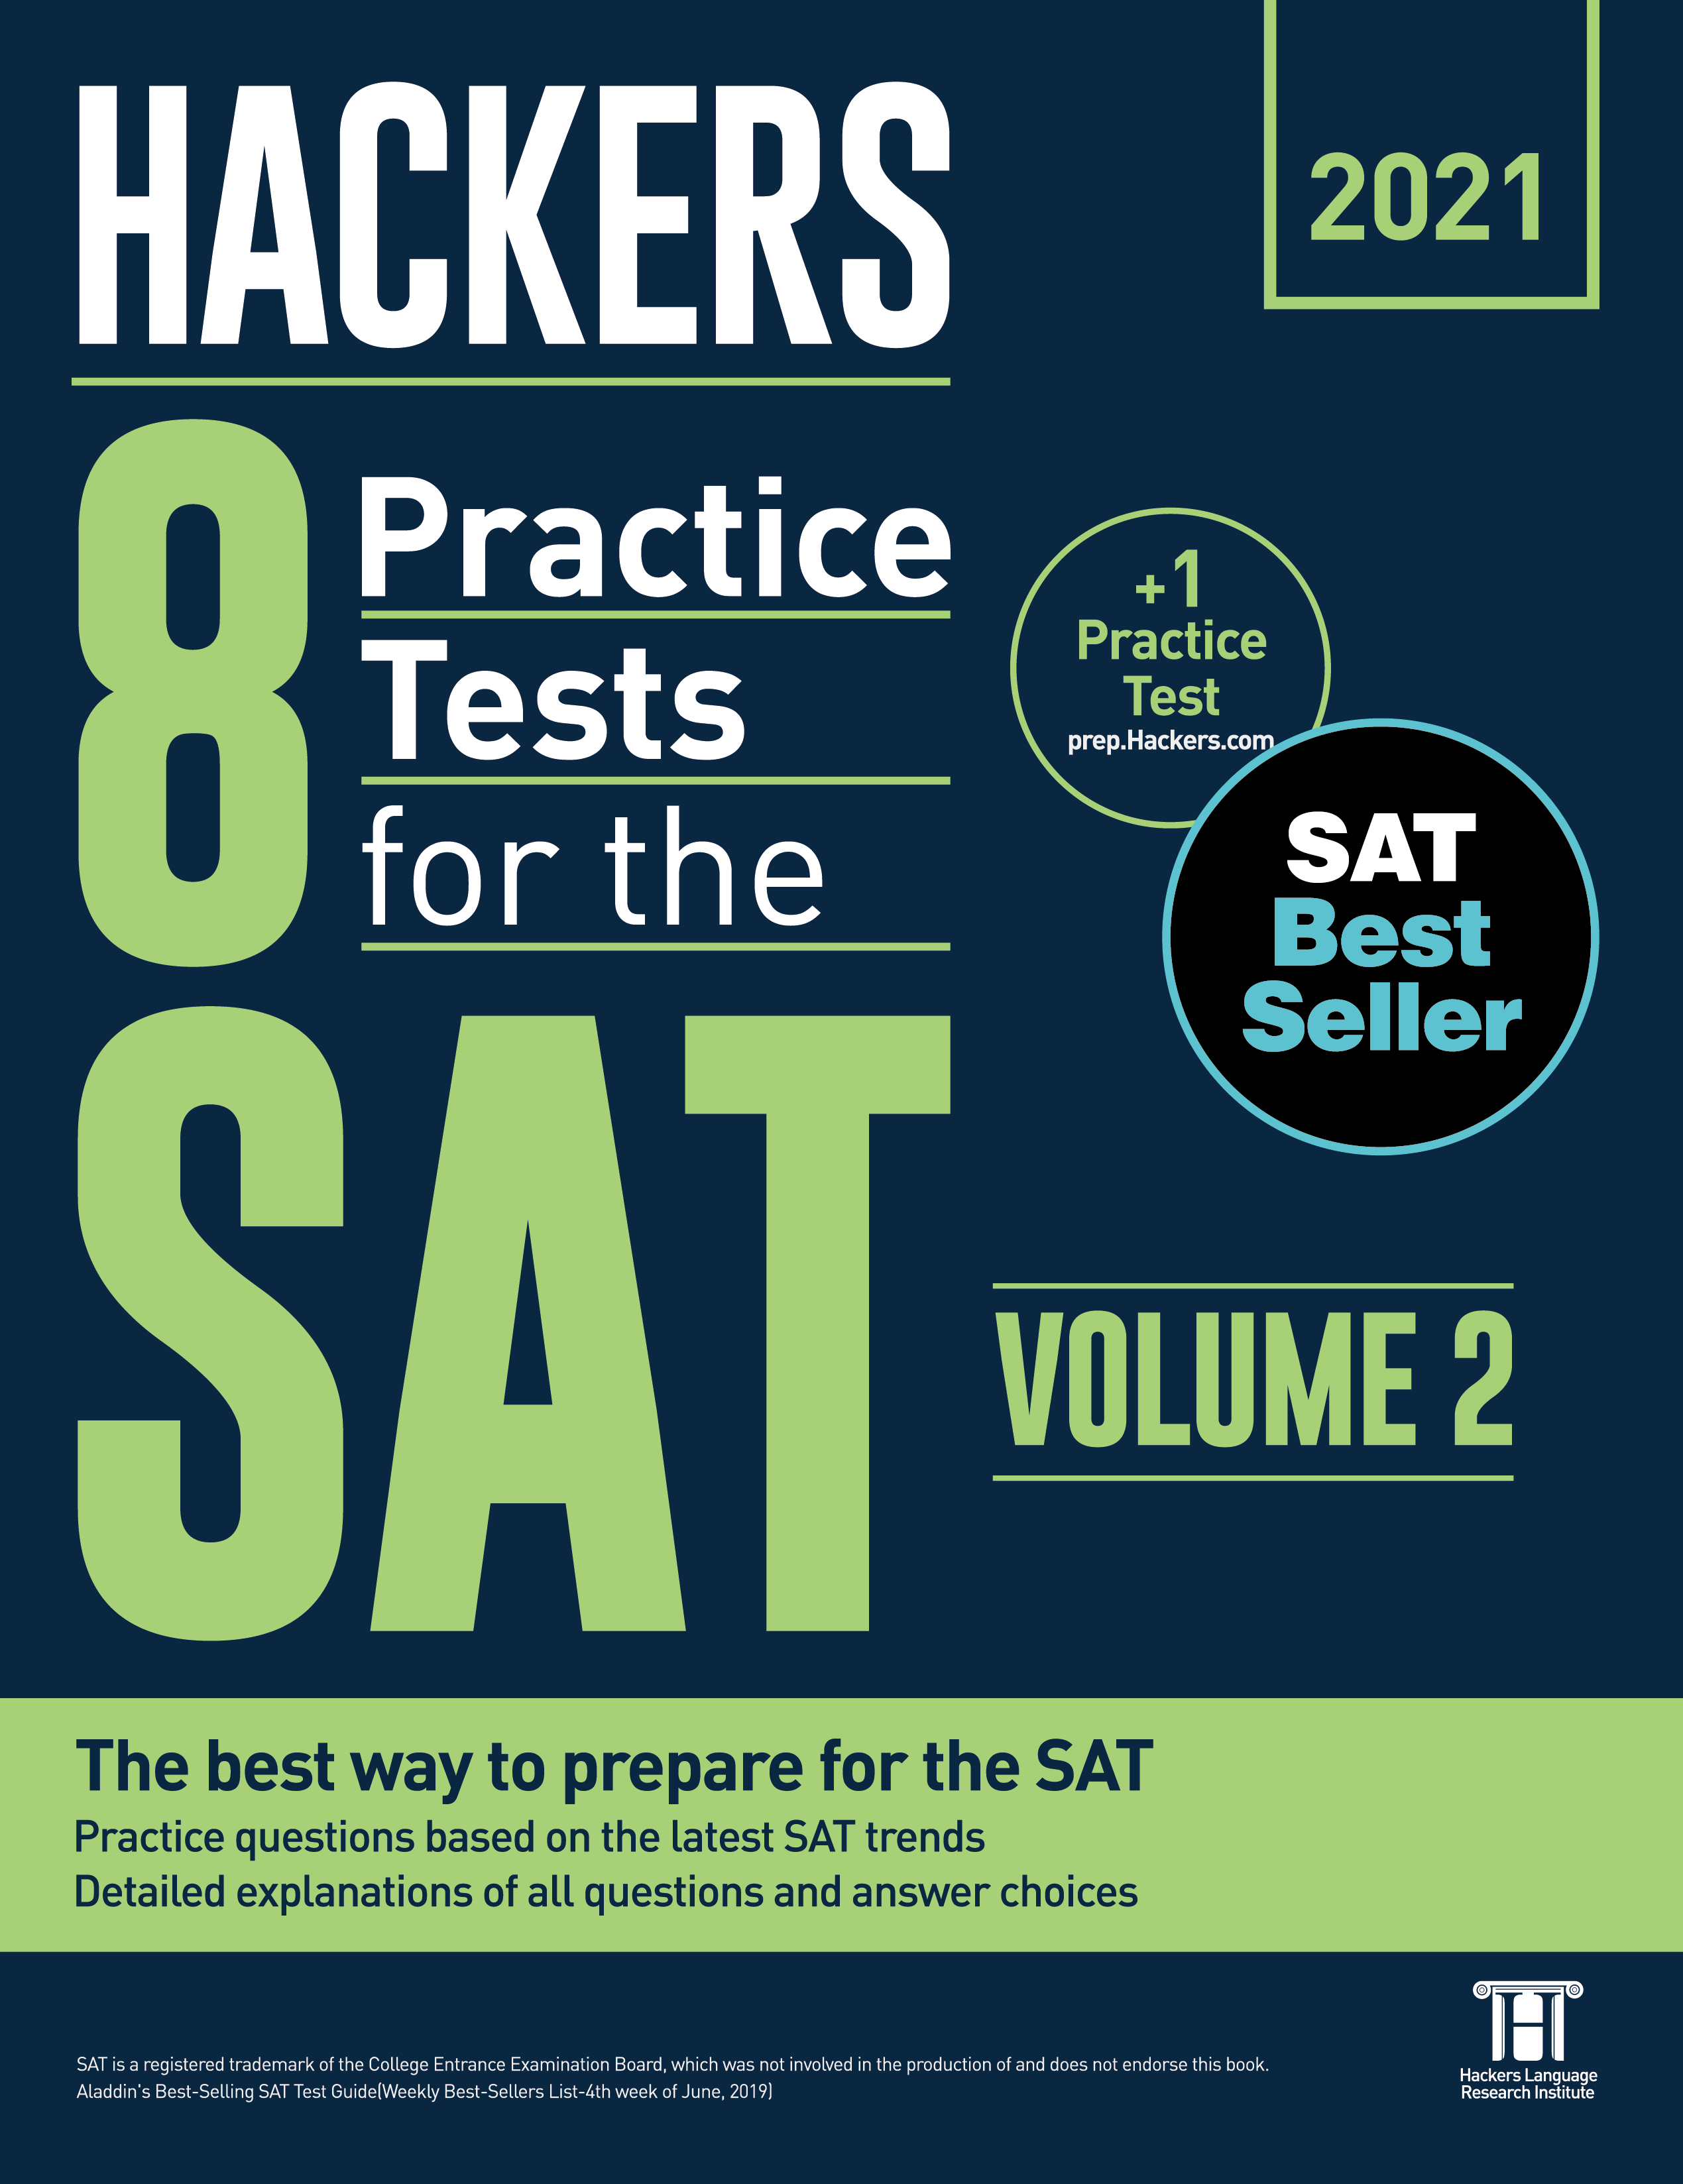 Hackers 8 Practice Tests for the SAT Volume 2